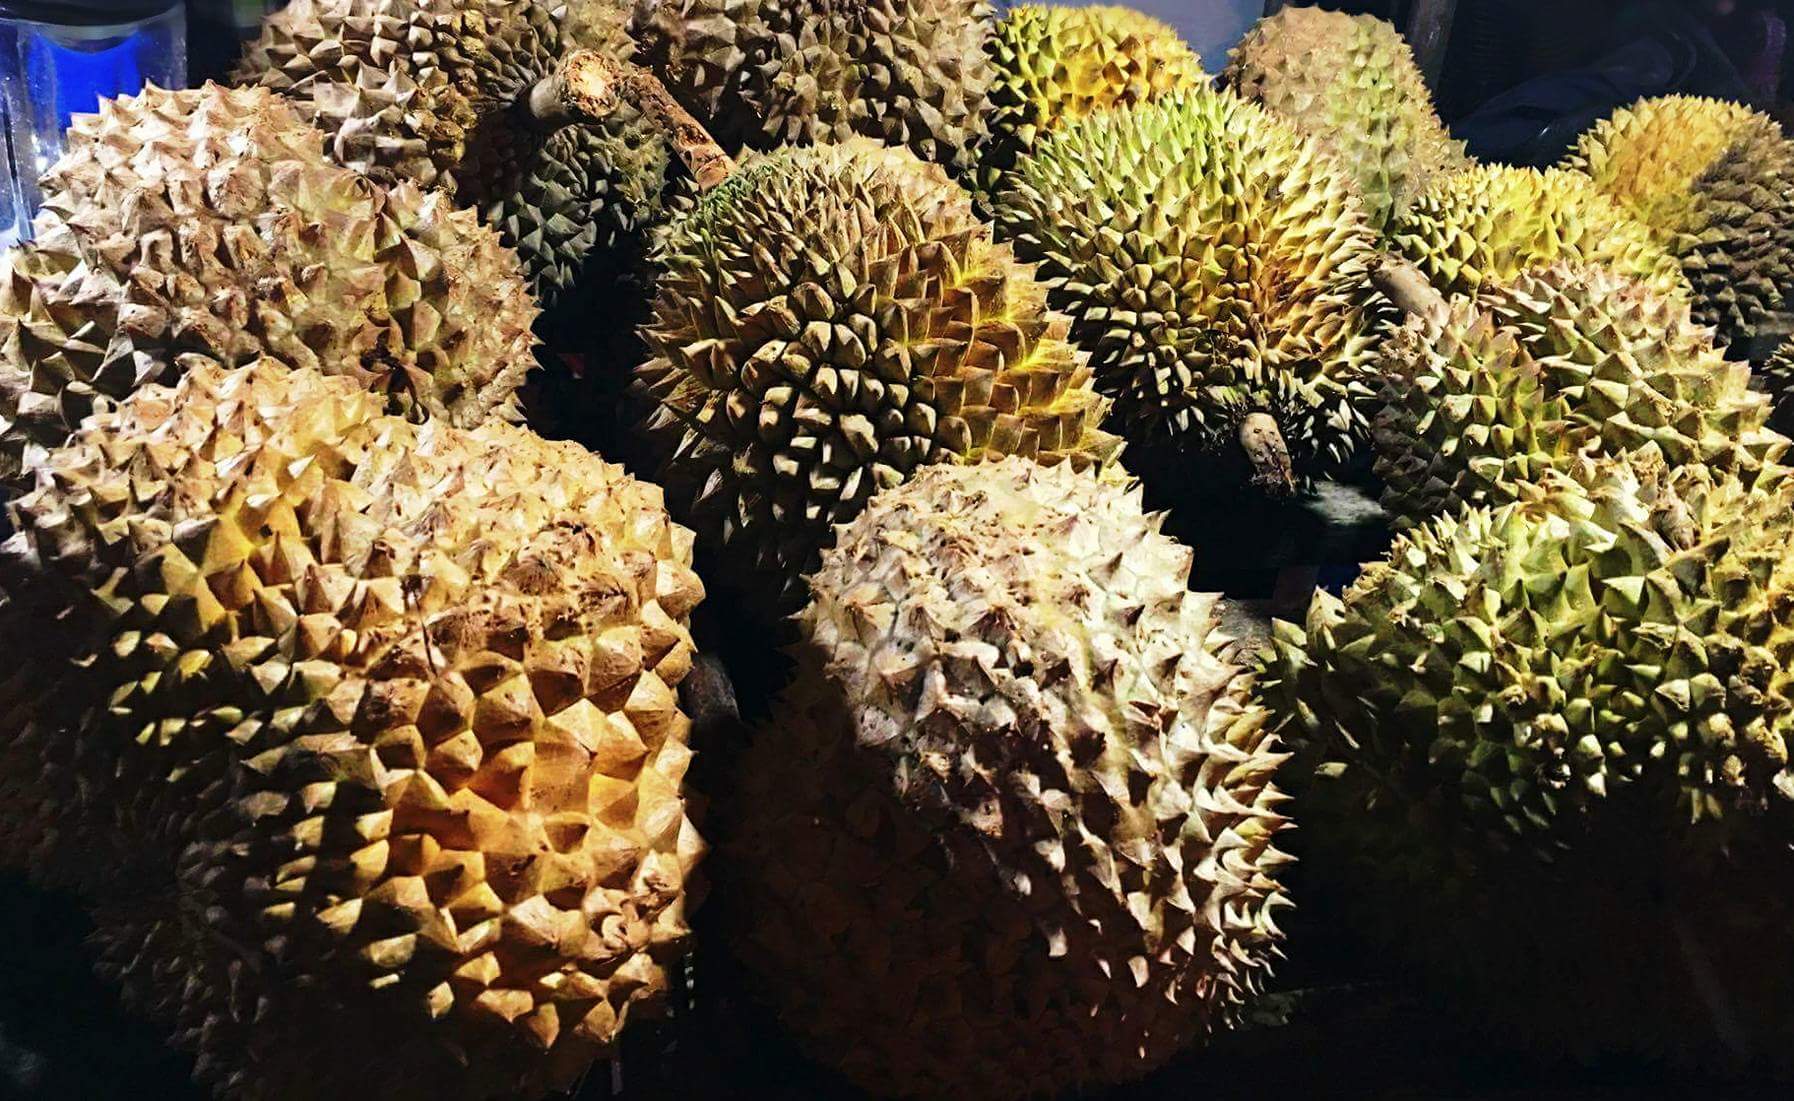 Prickly History: The Fruit That Tastes Like Heaven and Smells Like